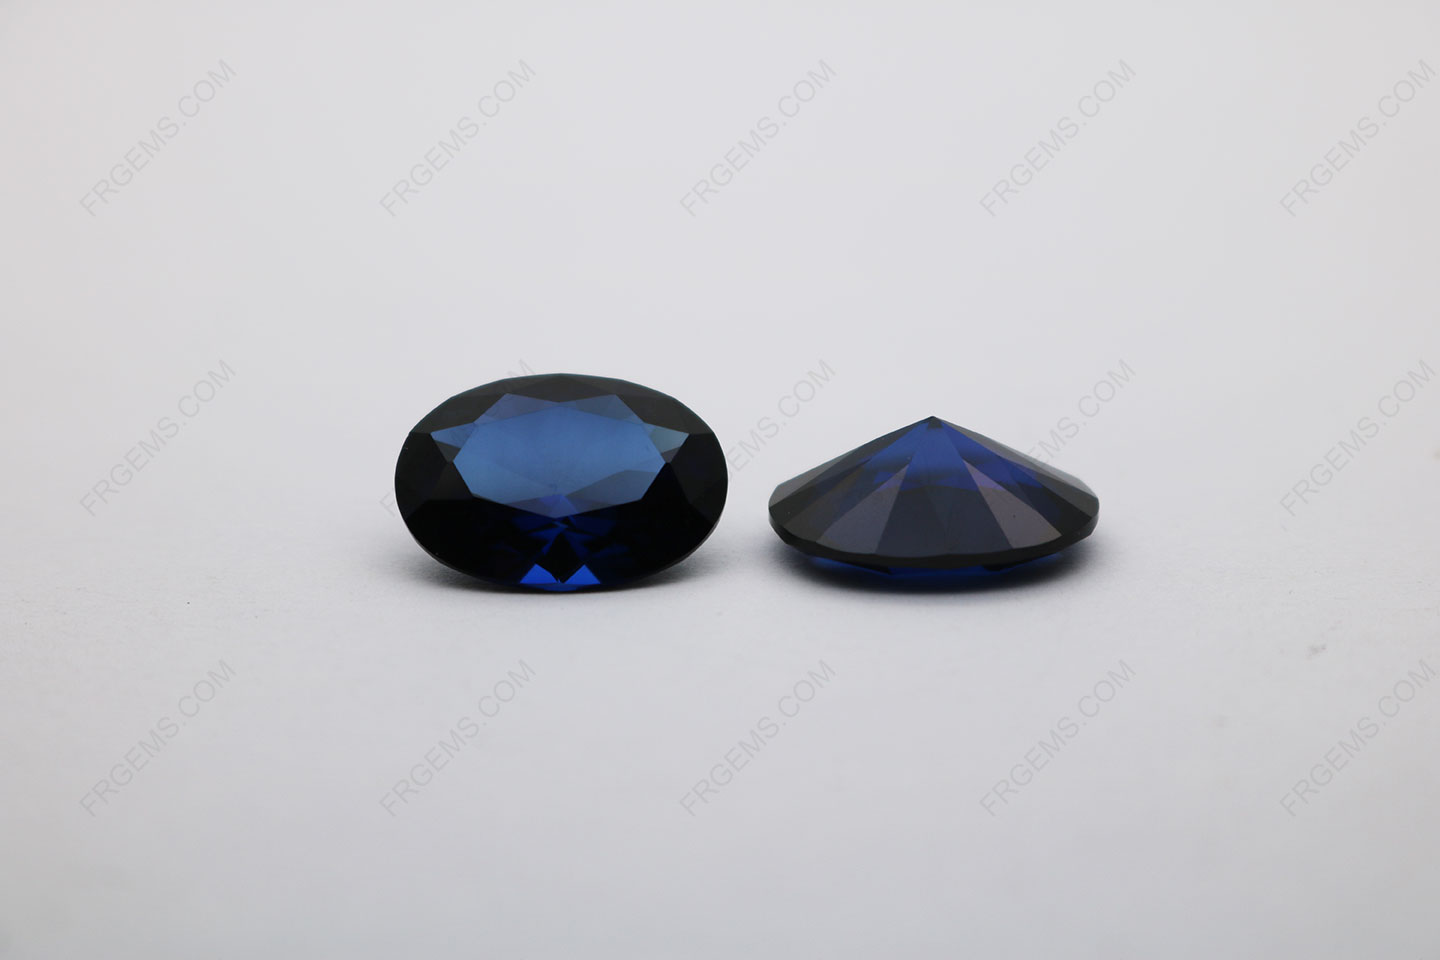 Loose Synthetic Lab Created Corundum Blue Sapphire 34# Oval Shape Faceted Cut 18x13mm stones IMG_4786